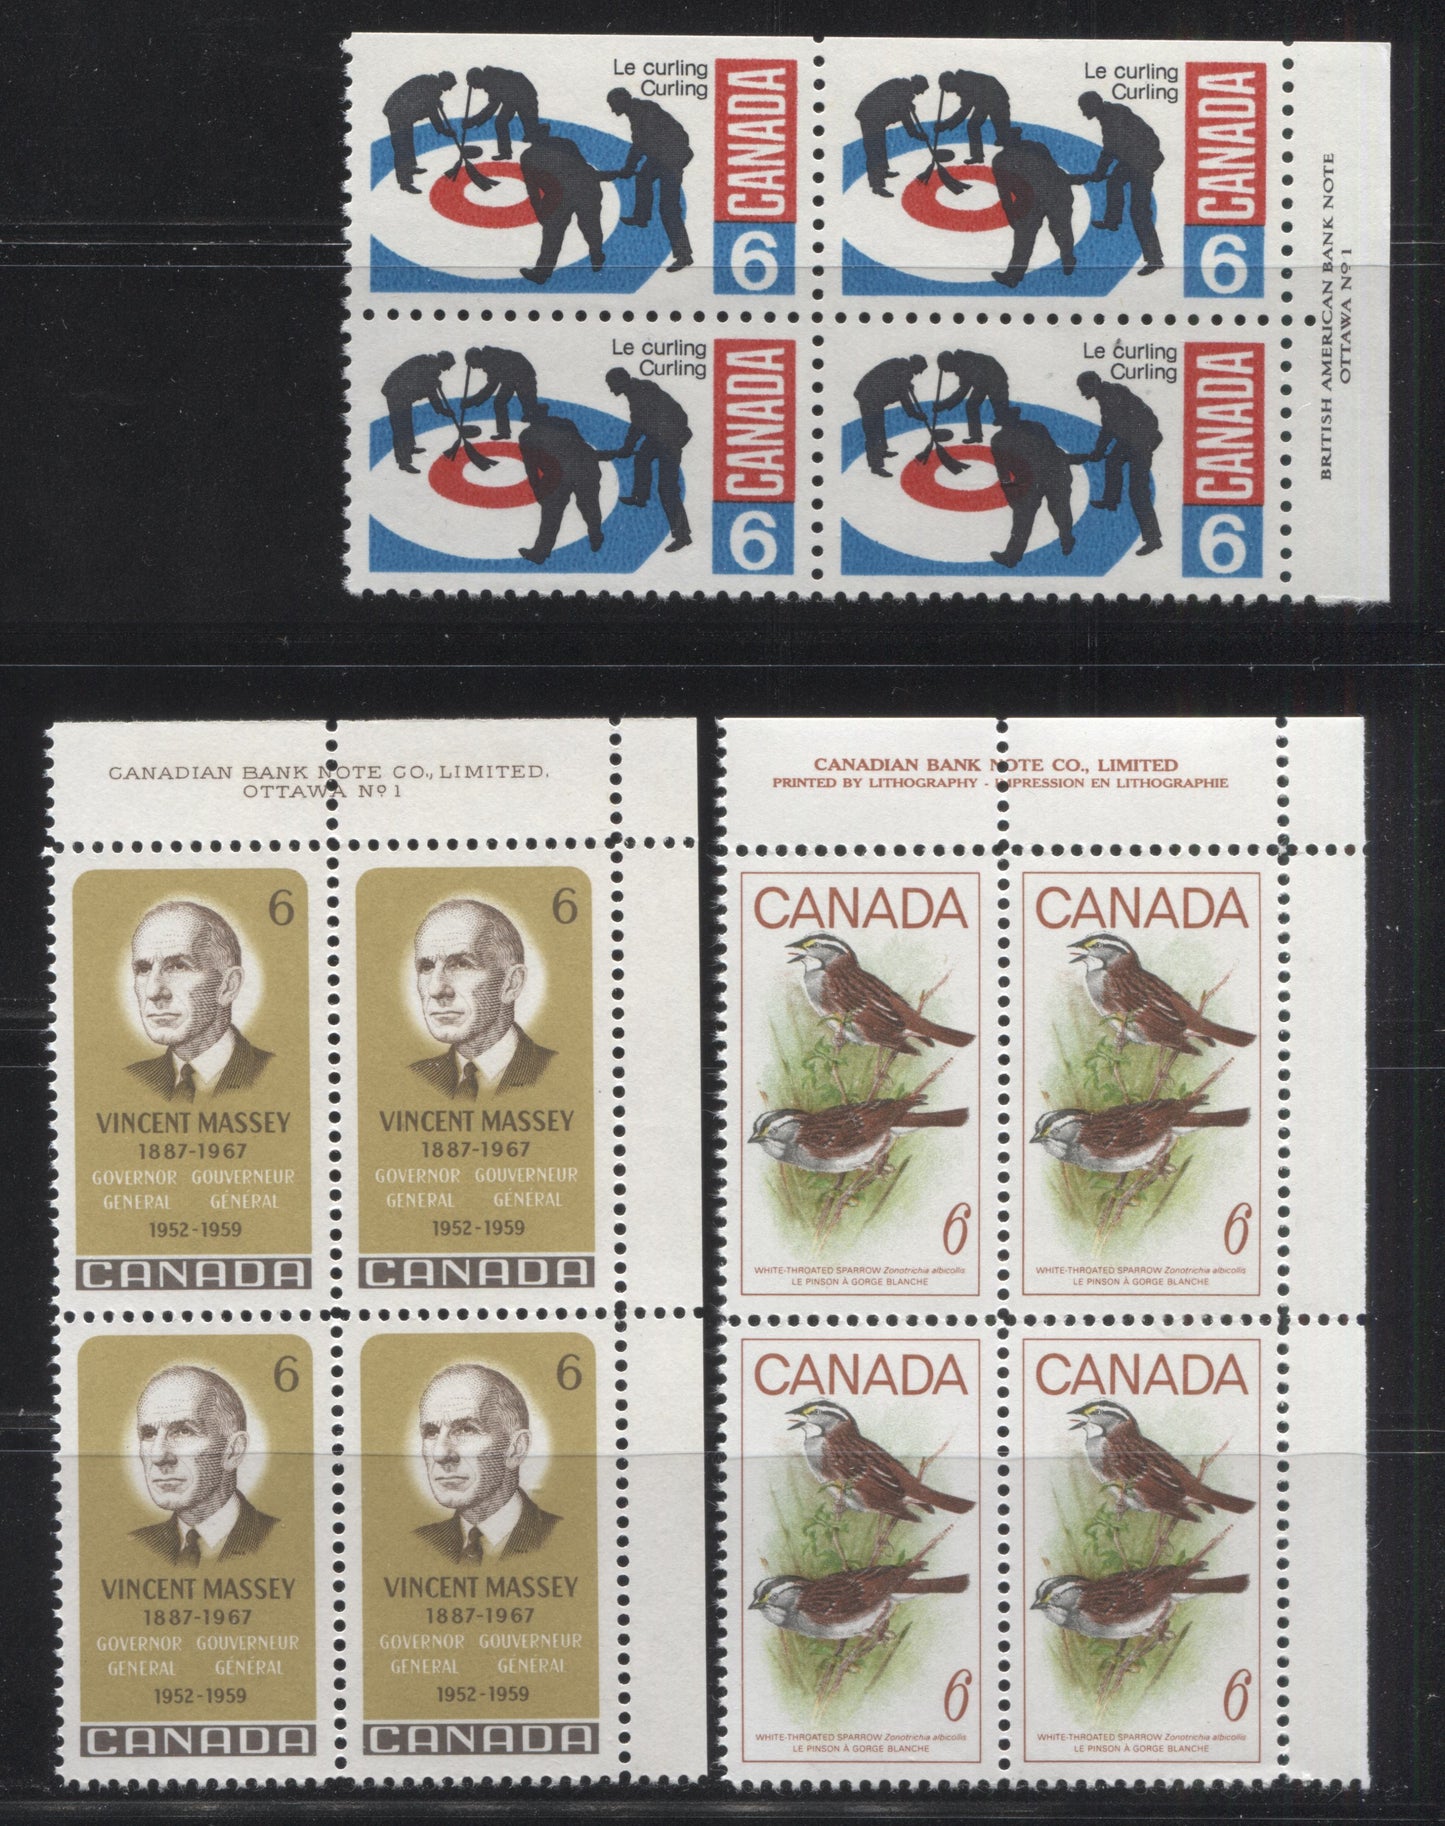 Lot 94 Canada #459-460, 490-491, 495-496 6c Orange - Multicolored Queen Elizabeth II - White Throated Sparrow, 1967-1972 Commemoratives & Definitives, 7 VFNH UR Plate 1-3 Blocks Of 4 & 6 On Dull Fluorescent and HB Papers